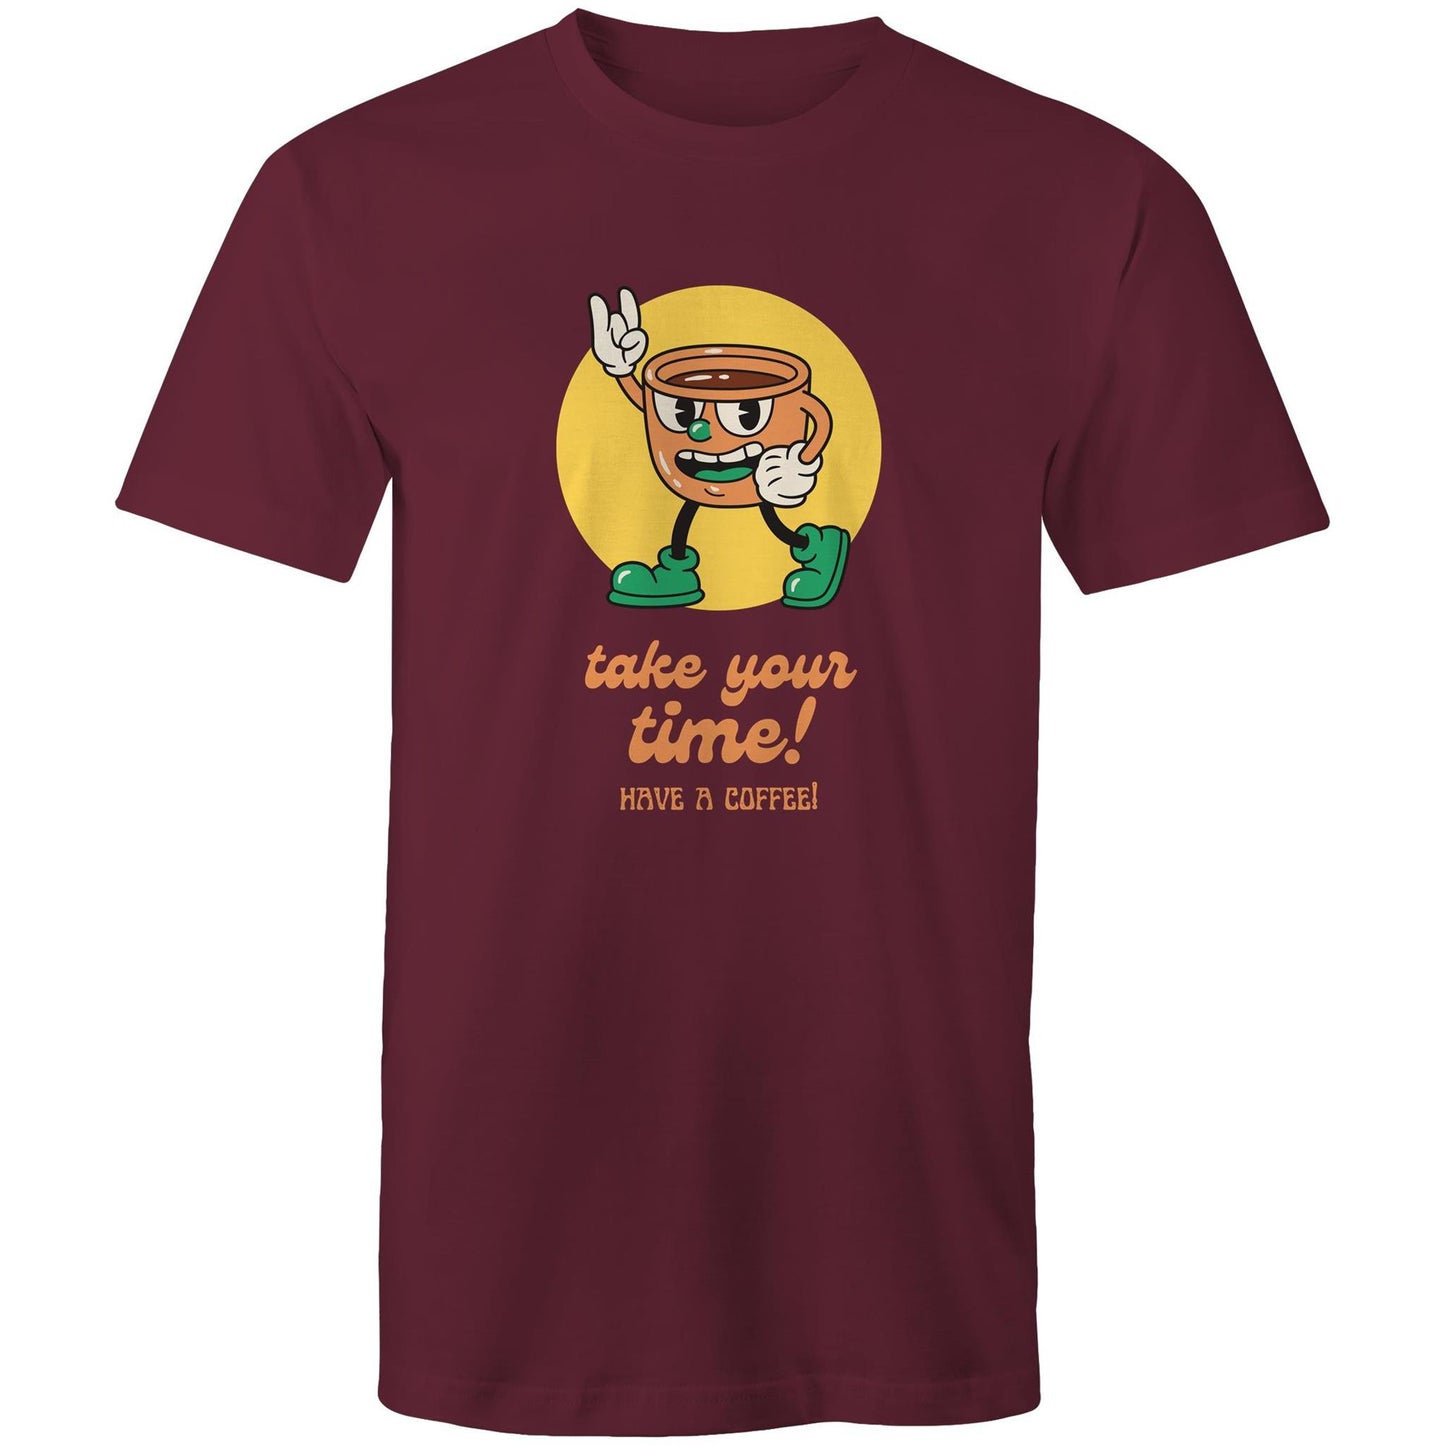 Take Your Time, Have A Coffee - Mens T-Shirt Burgundy Mens T-shirt Coffee